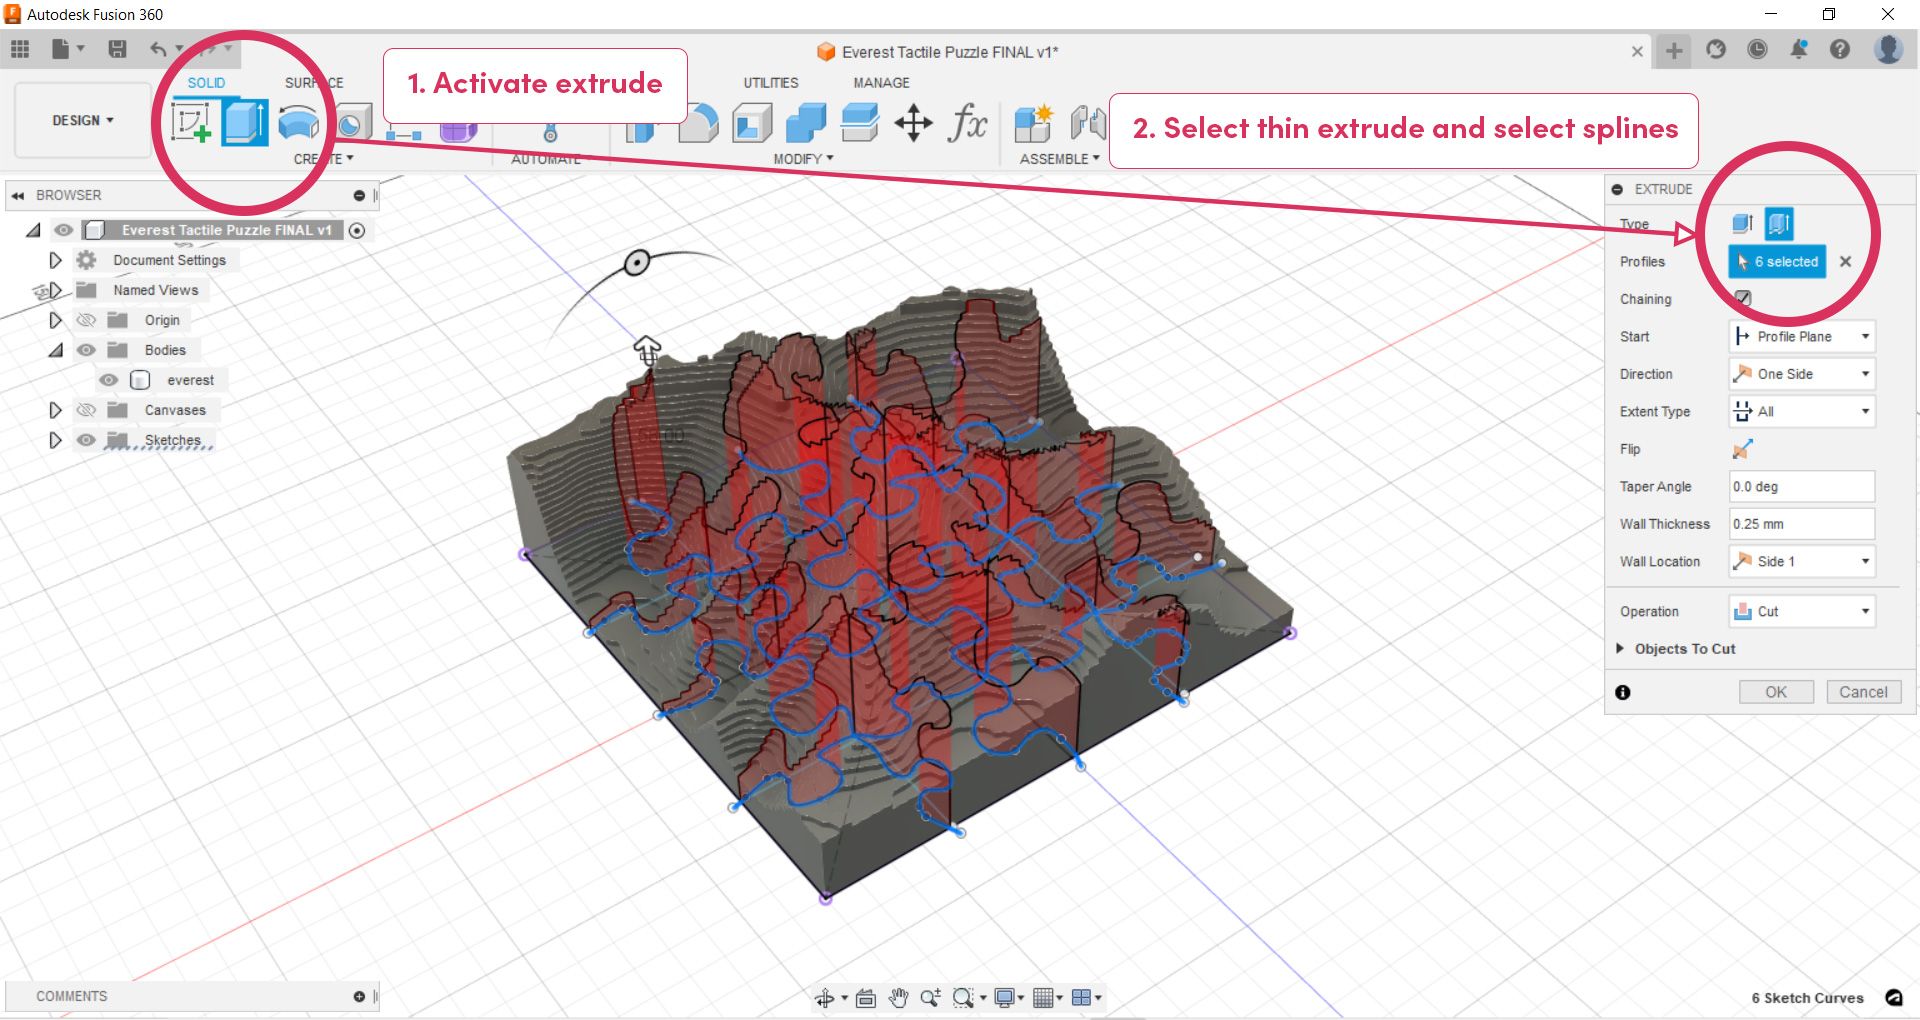 "Extrude" tool being used in Fusion 360 software to create a three dimensional contour map of Mt Everest.